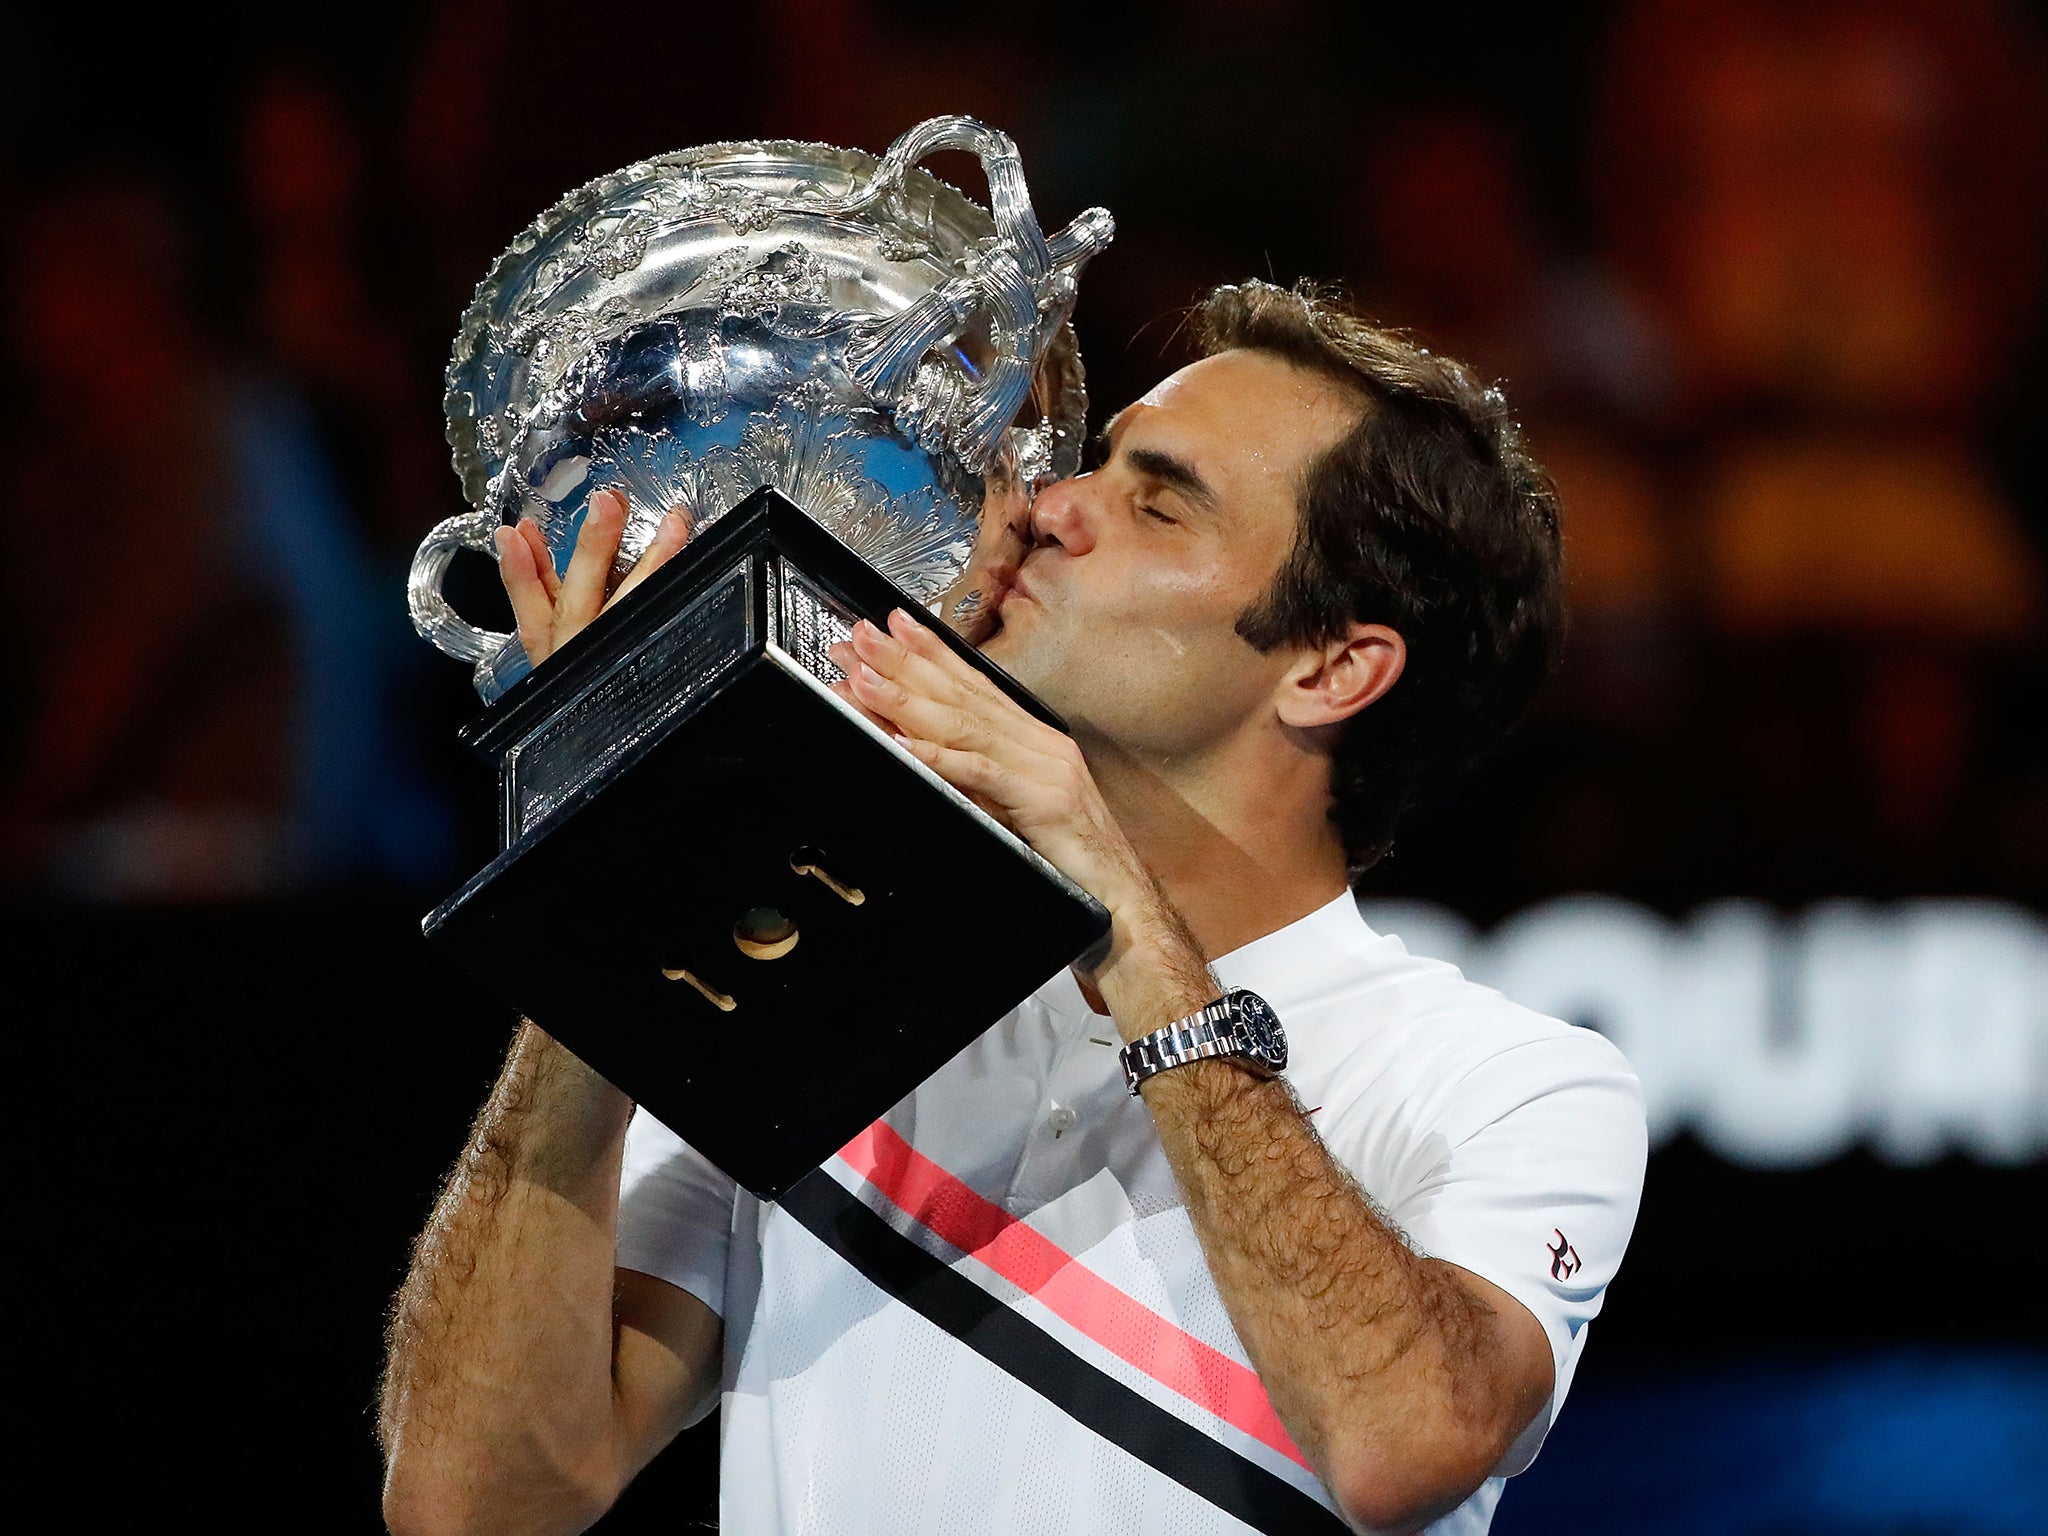 Roger Federer won his 20th Grand Slam title by beating Marin Cilic in the Australian Open final